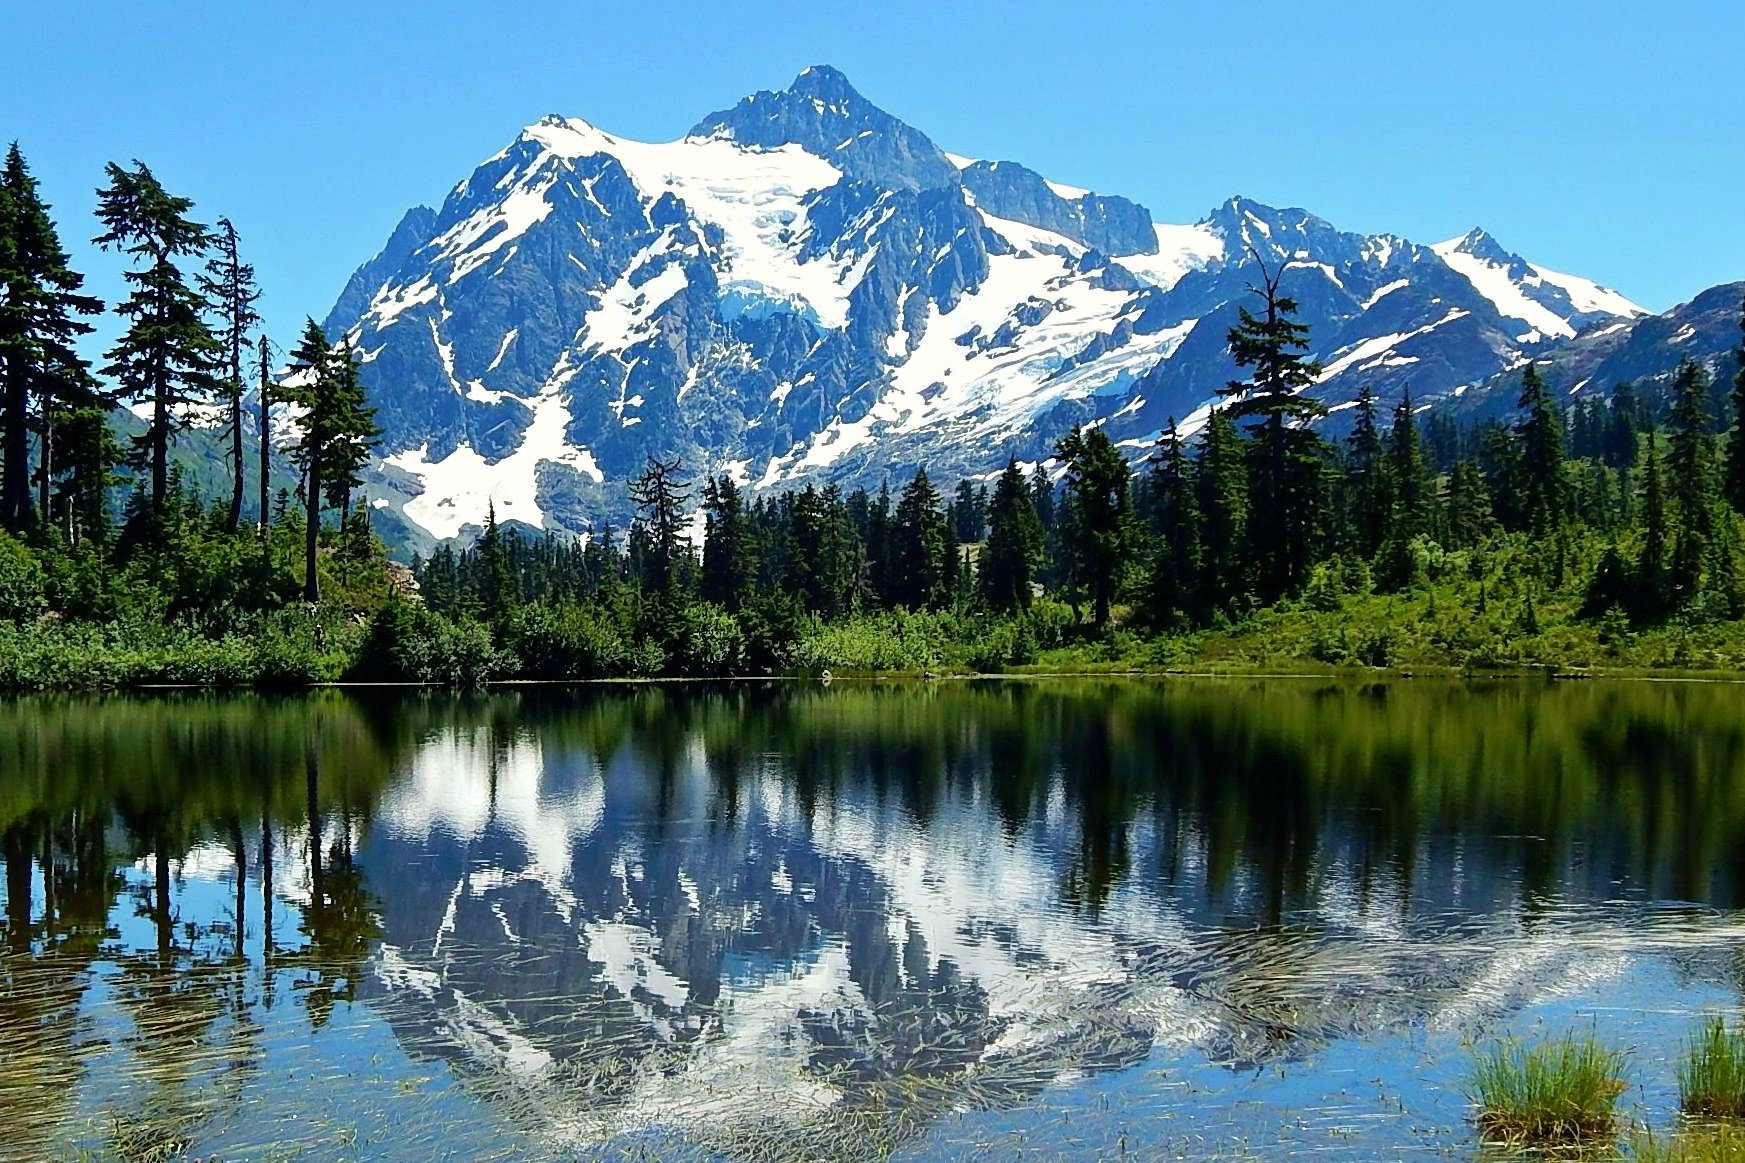 scenic places to visit in washington state